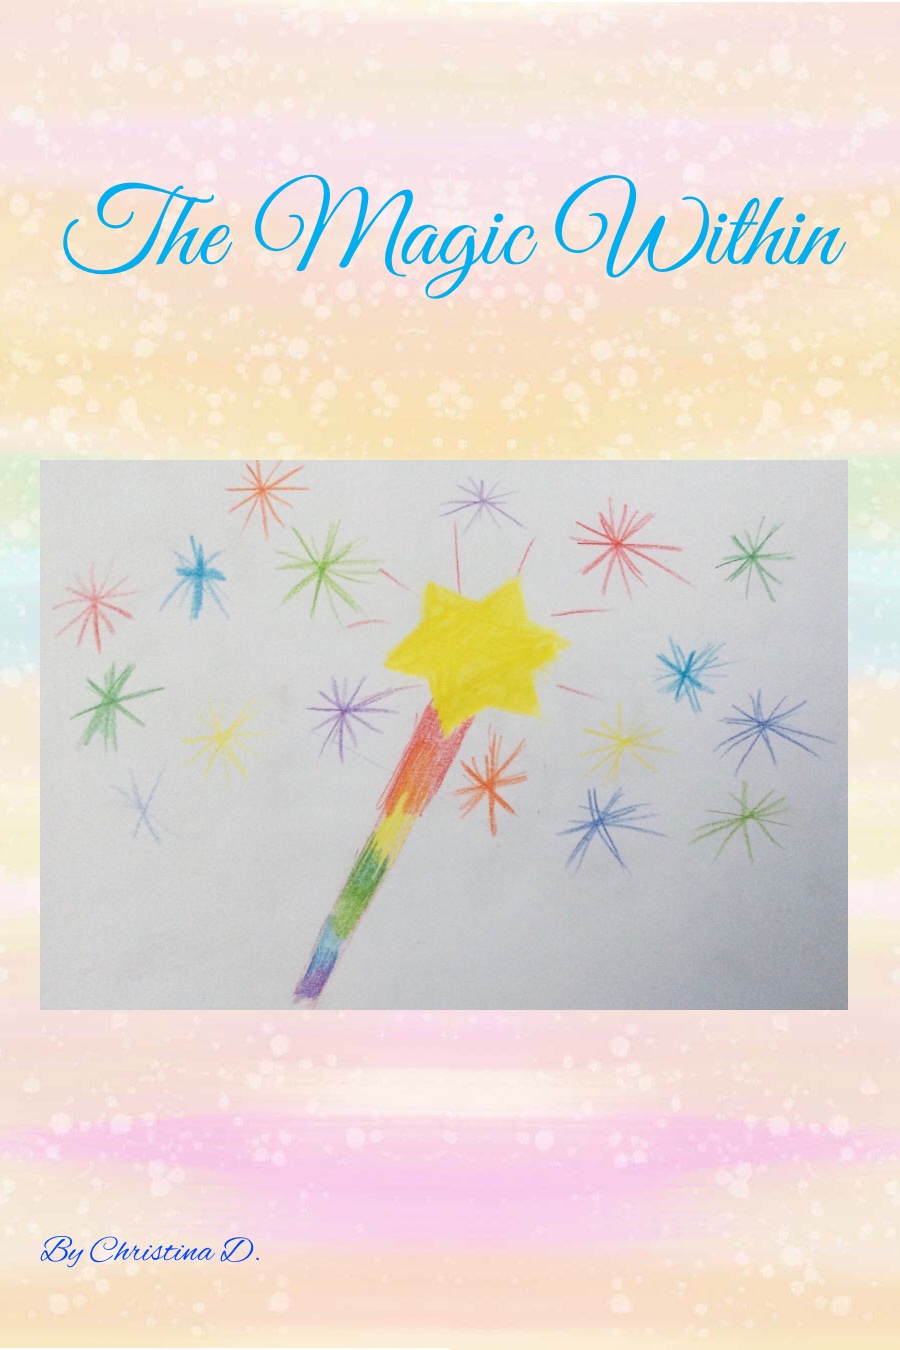 The Magic Within by Christina D